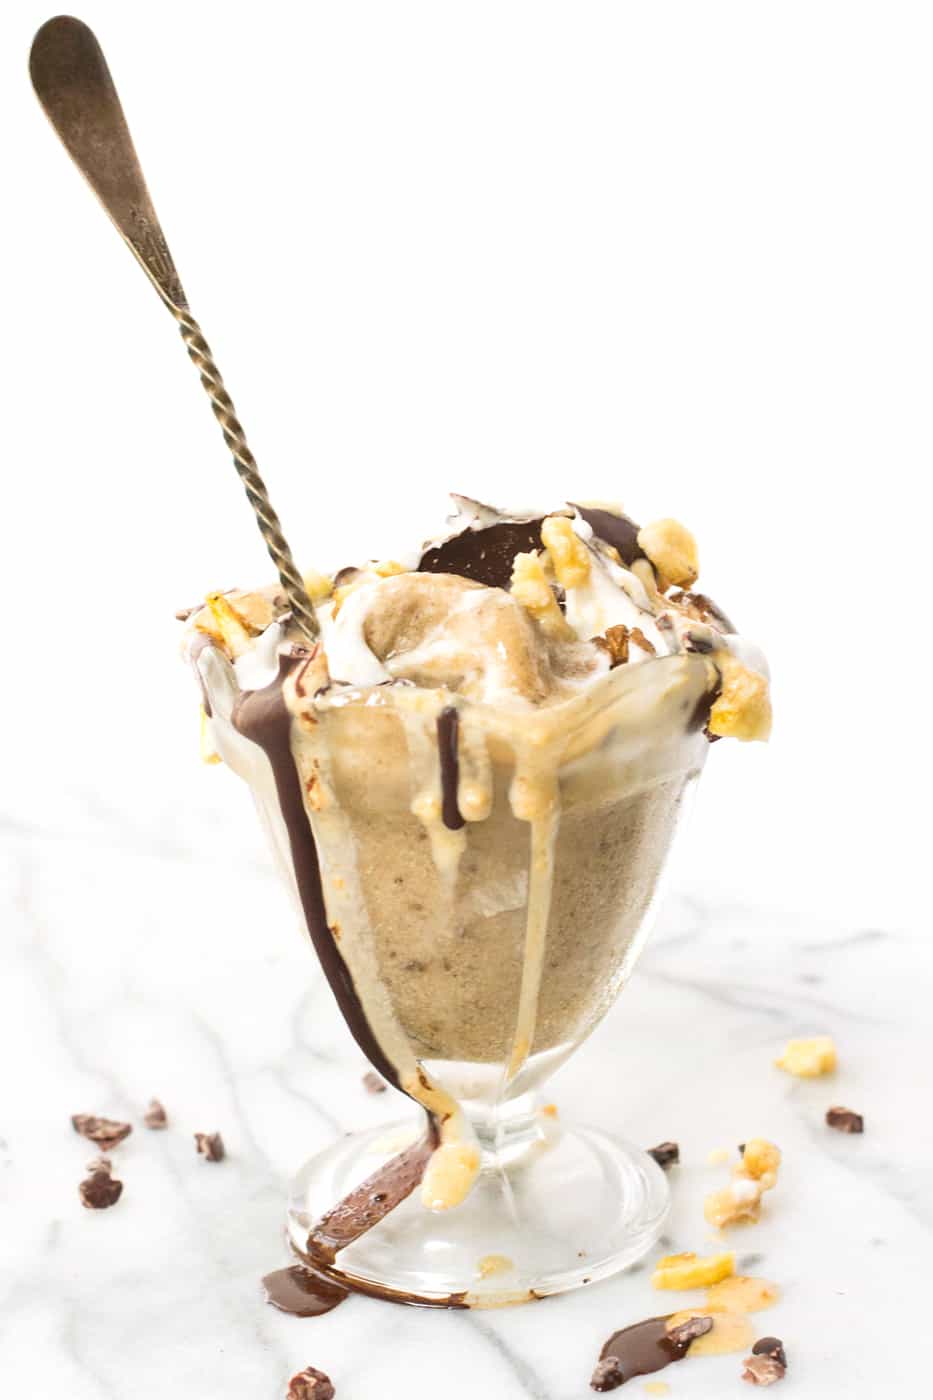 The BEST banana ice cream sundae EVER! all healthy ingredients, totally decadent and vegan too!